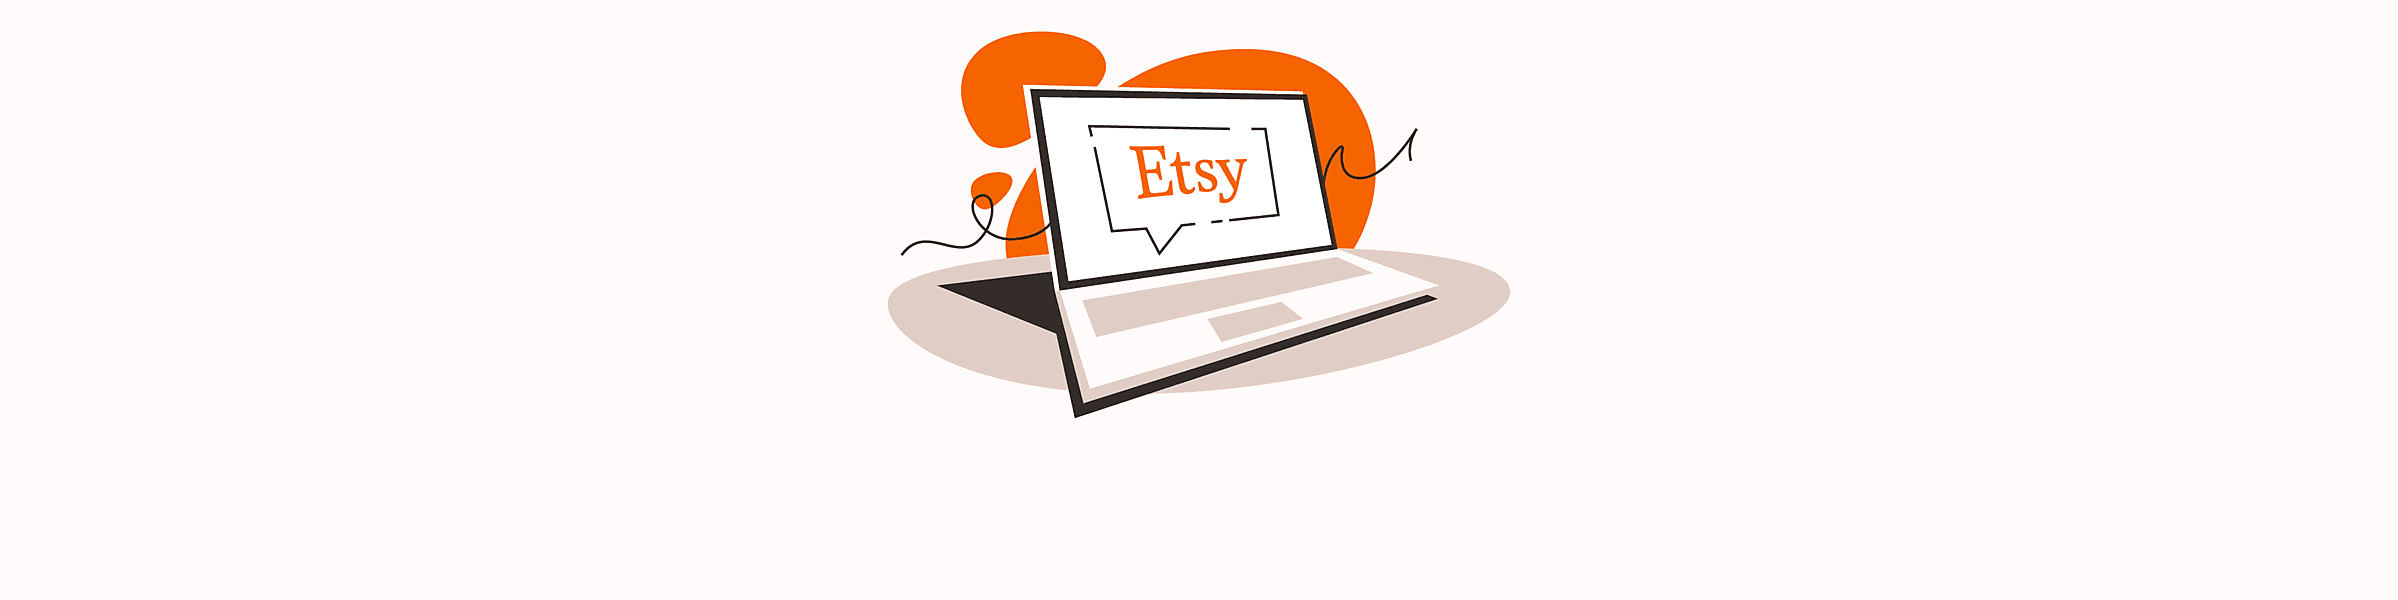 Full Guide On How To Make a Marketplace Like Etsy: Key Features, Tips, and Costs